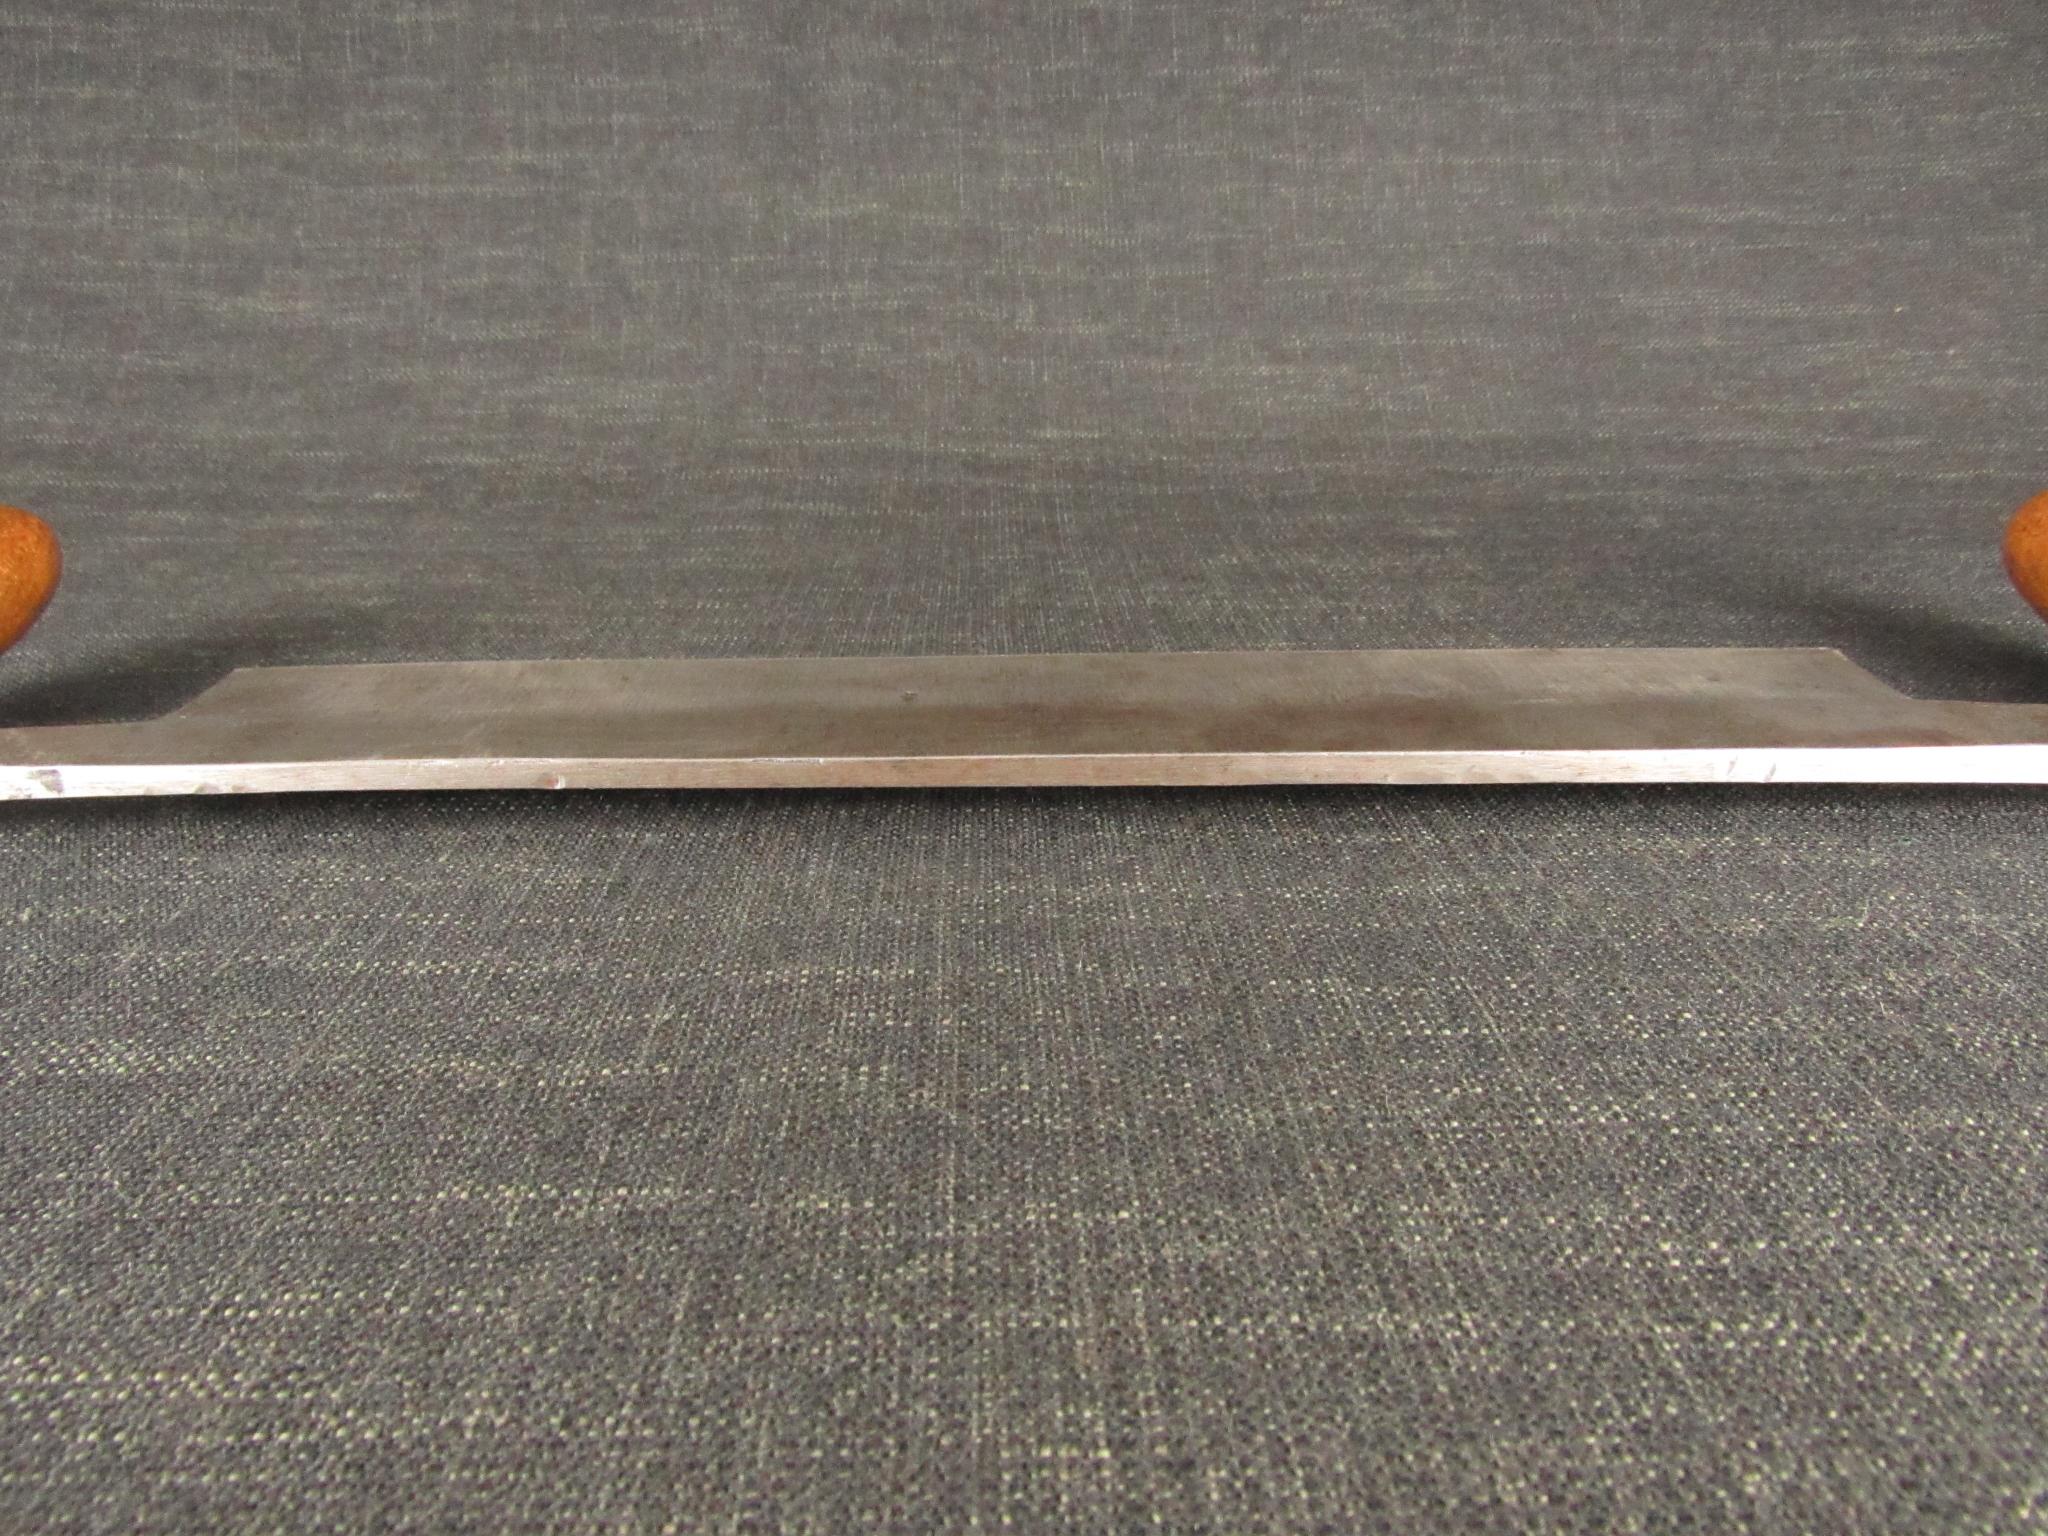 Very Large GILPIN Drawknife with 14 inch Edge